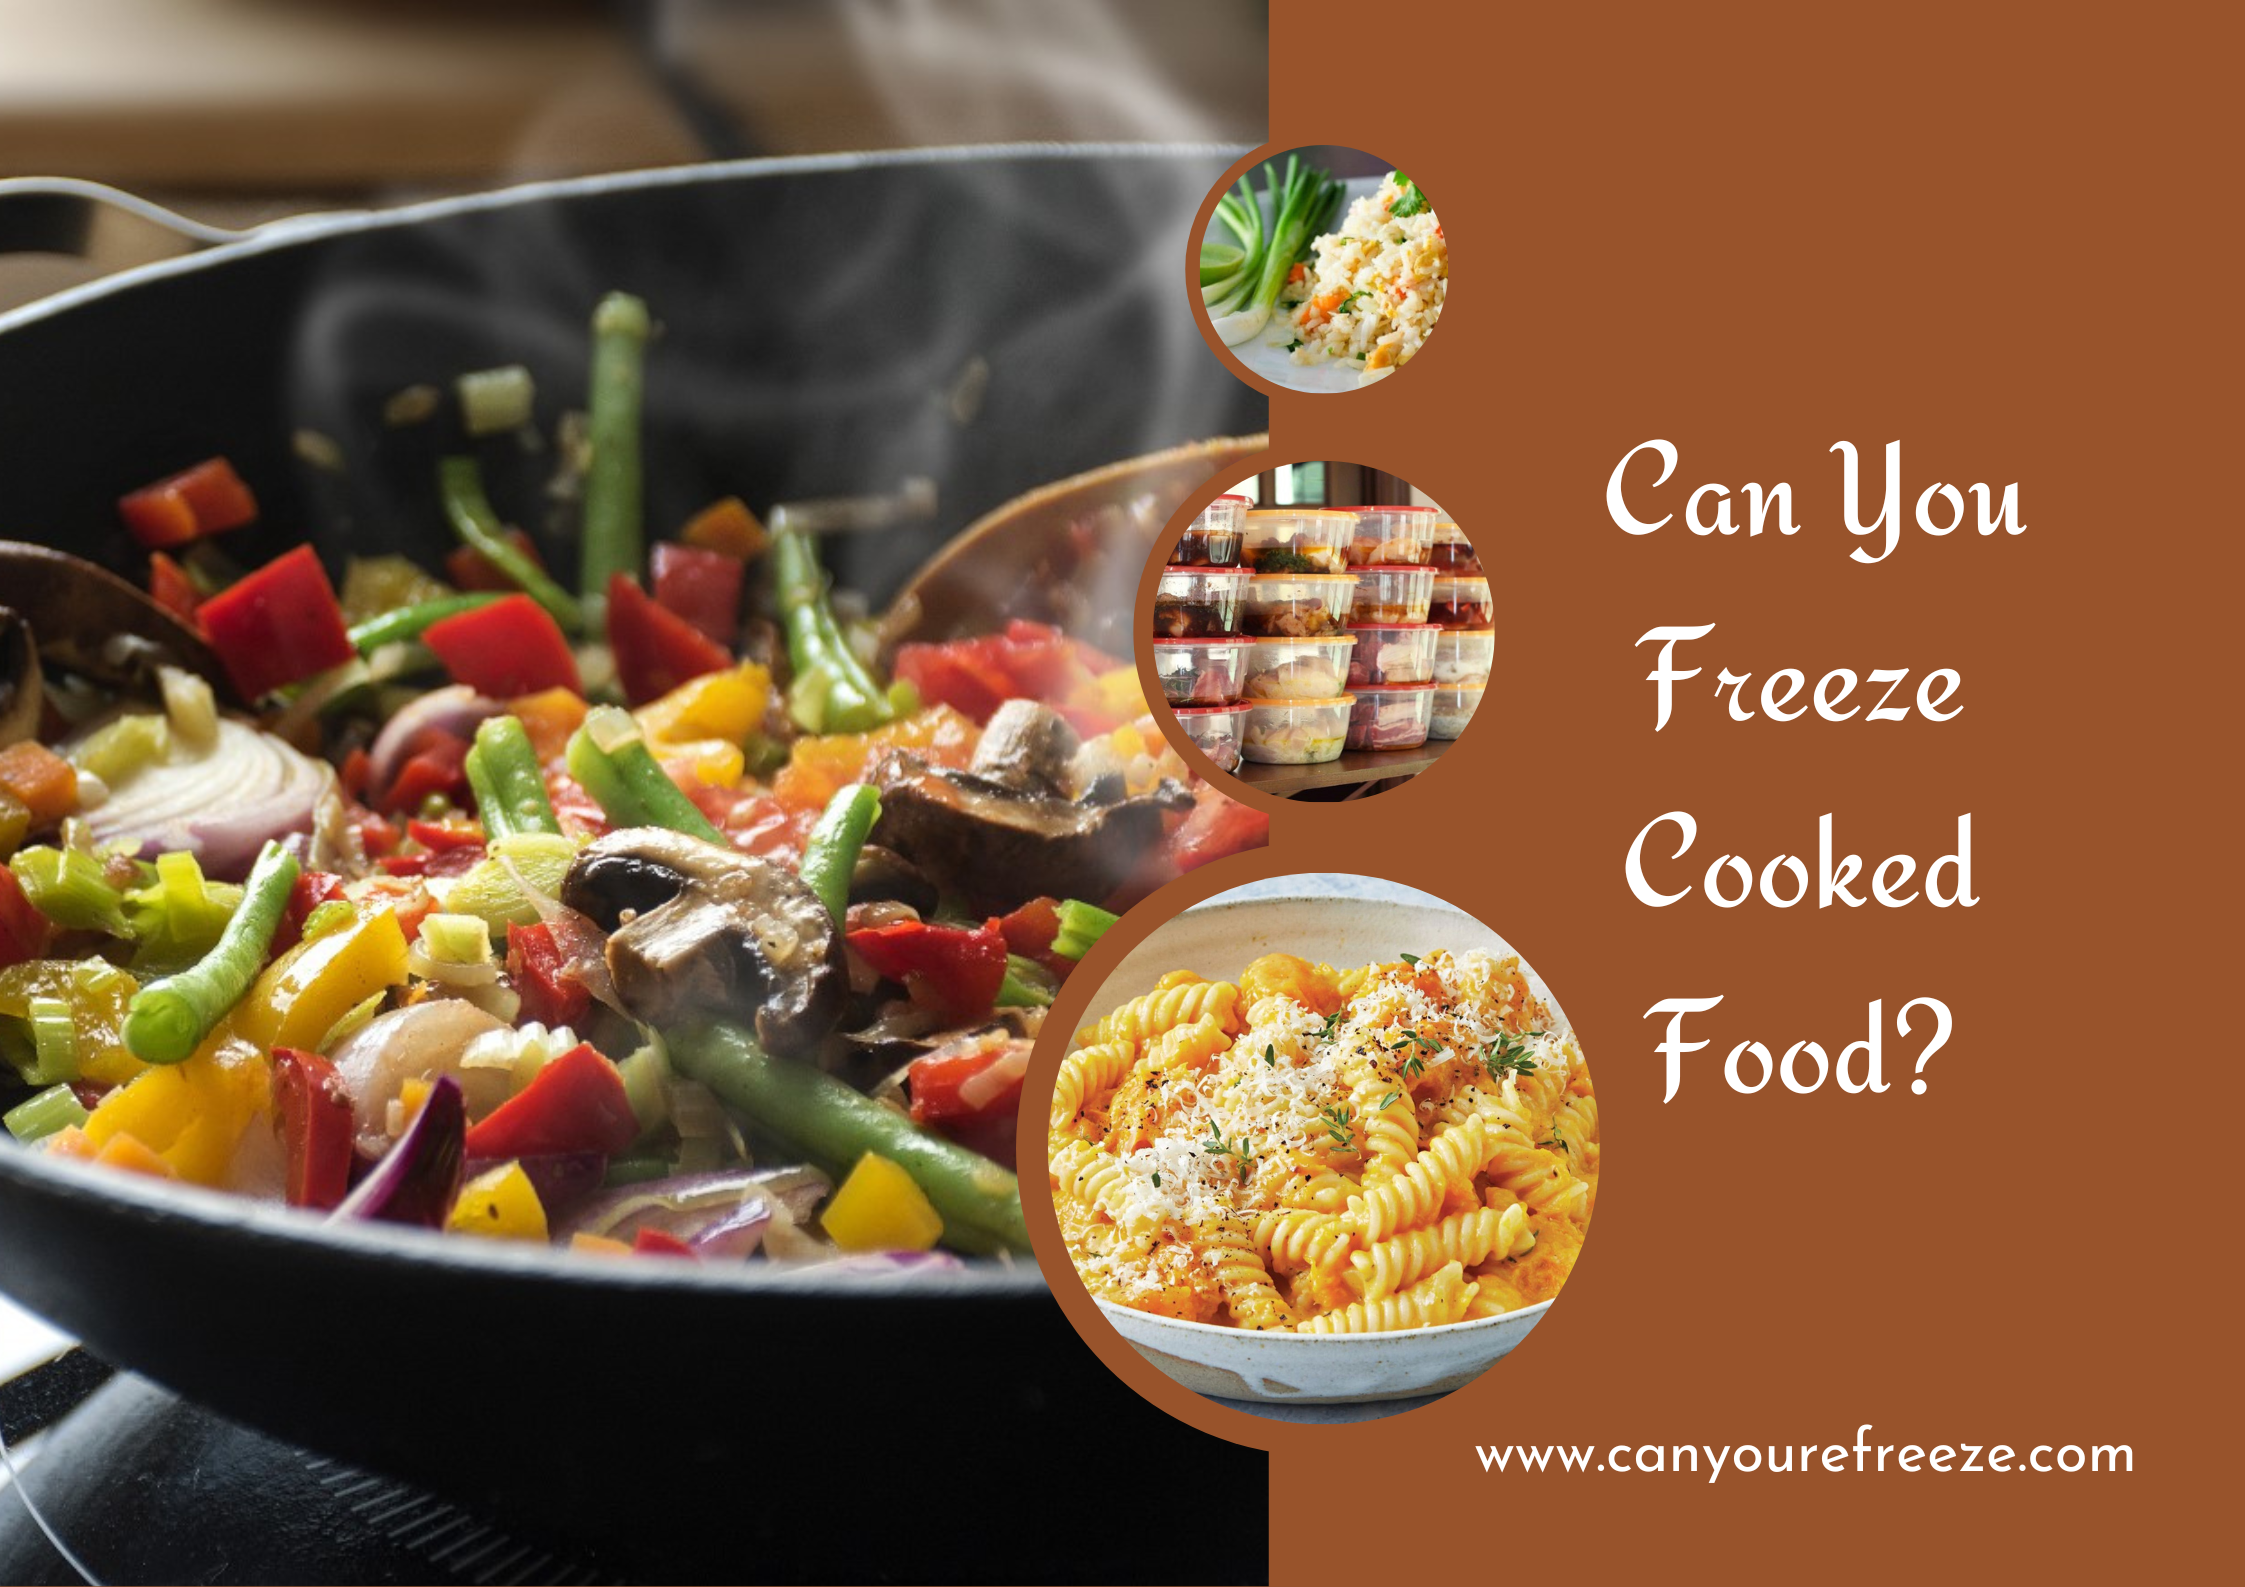 Can You Freeze Cooked Food